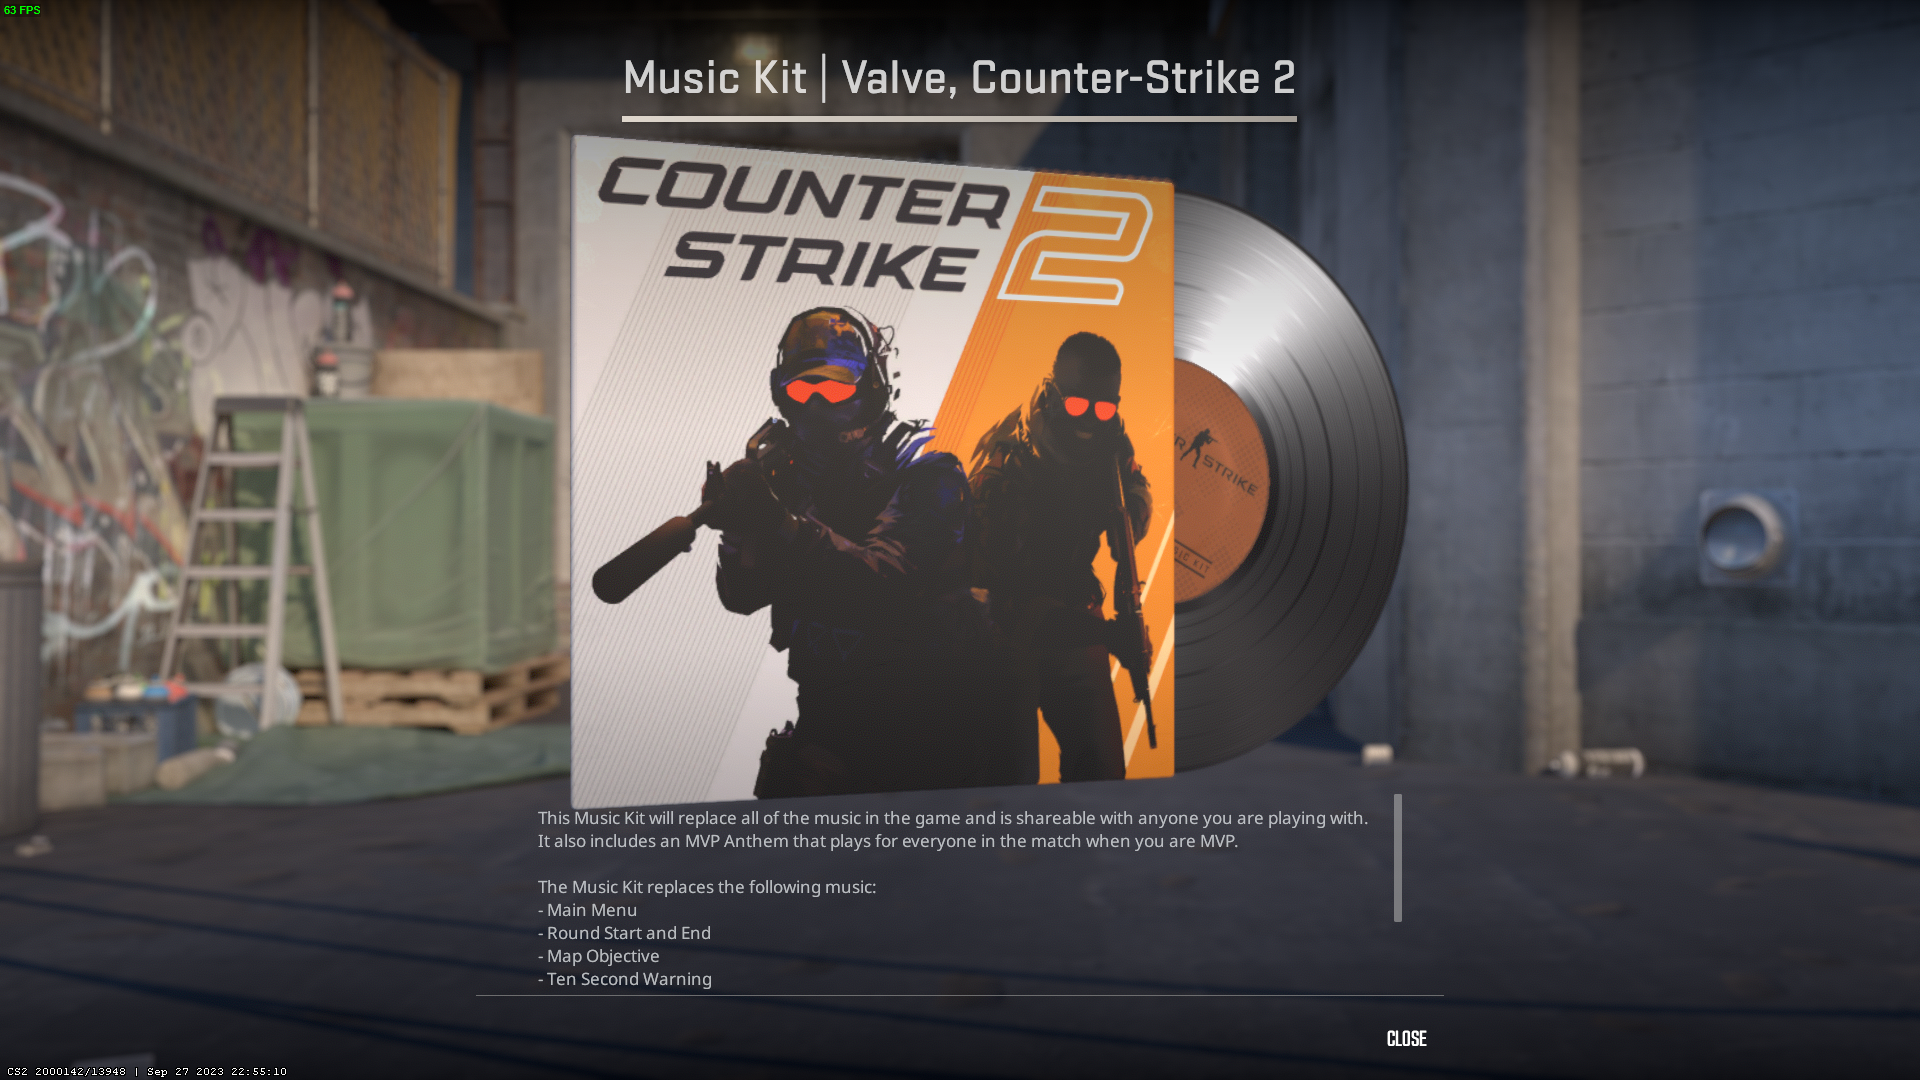 Counter-Strike 2 (CS2) Global Offensive Badge: How to get, features, and  more